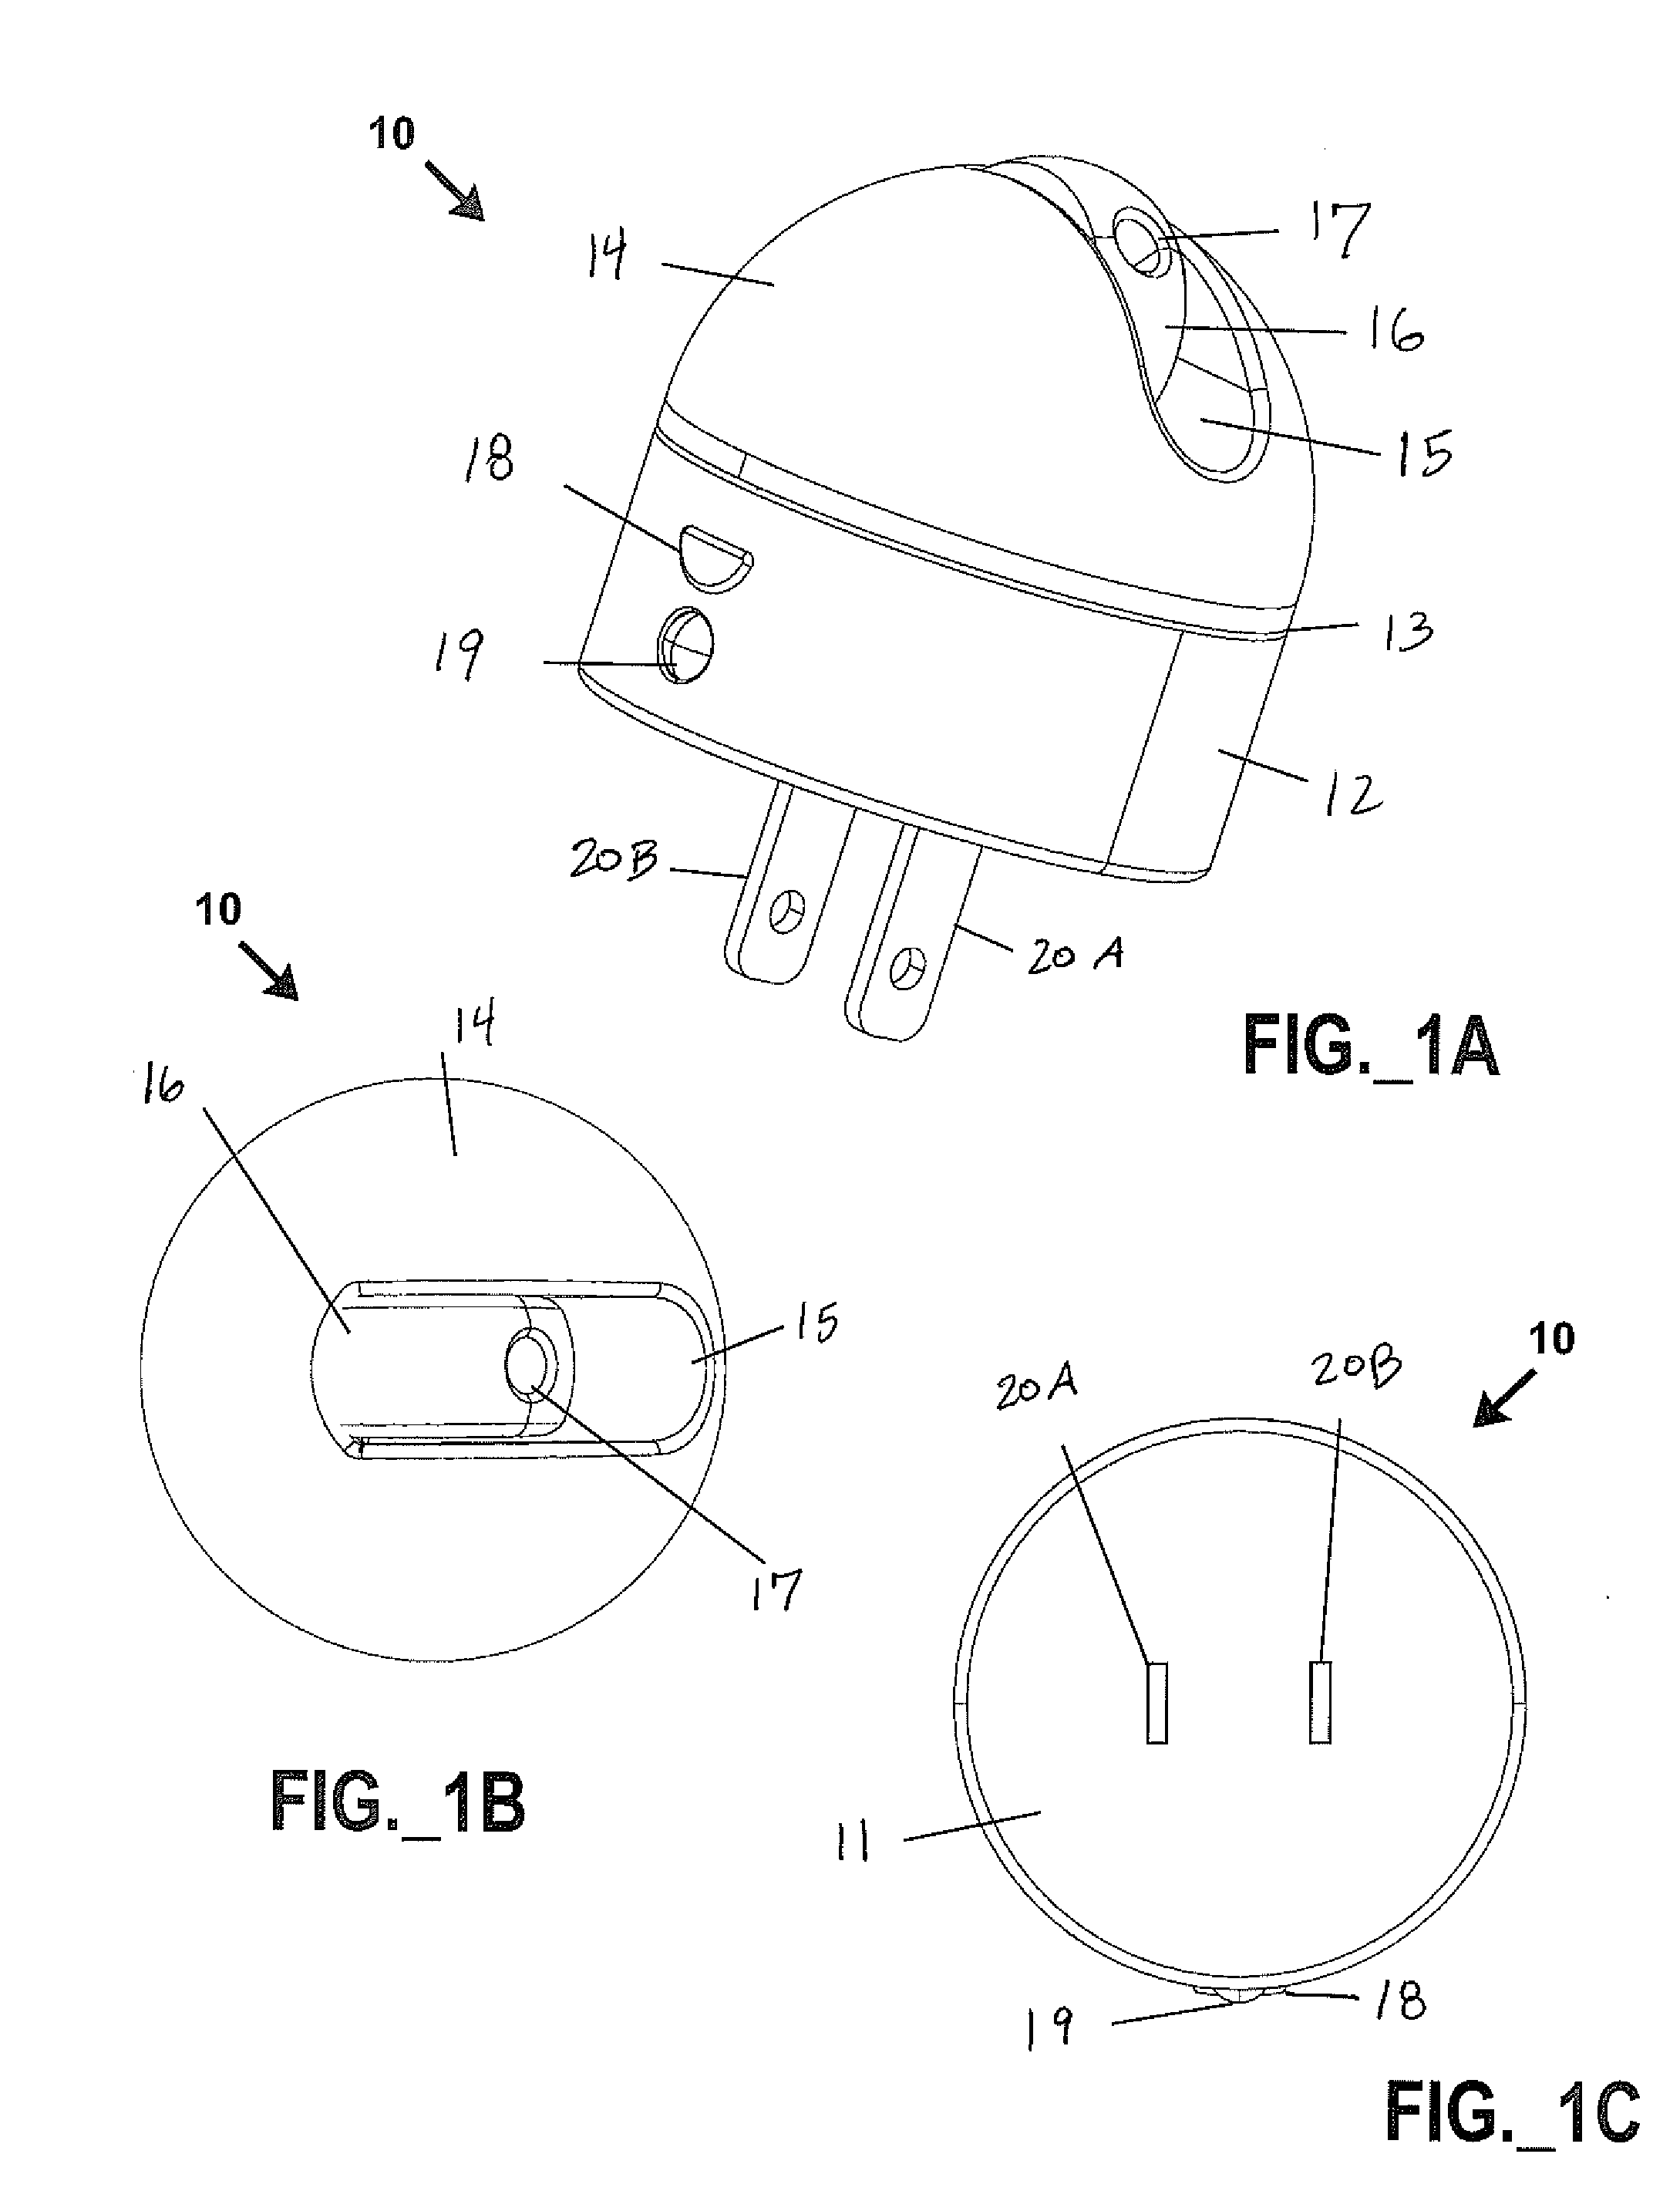 Systems and methods for animal containment, training, and tracking